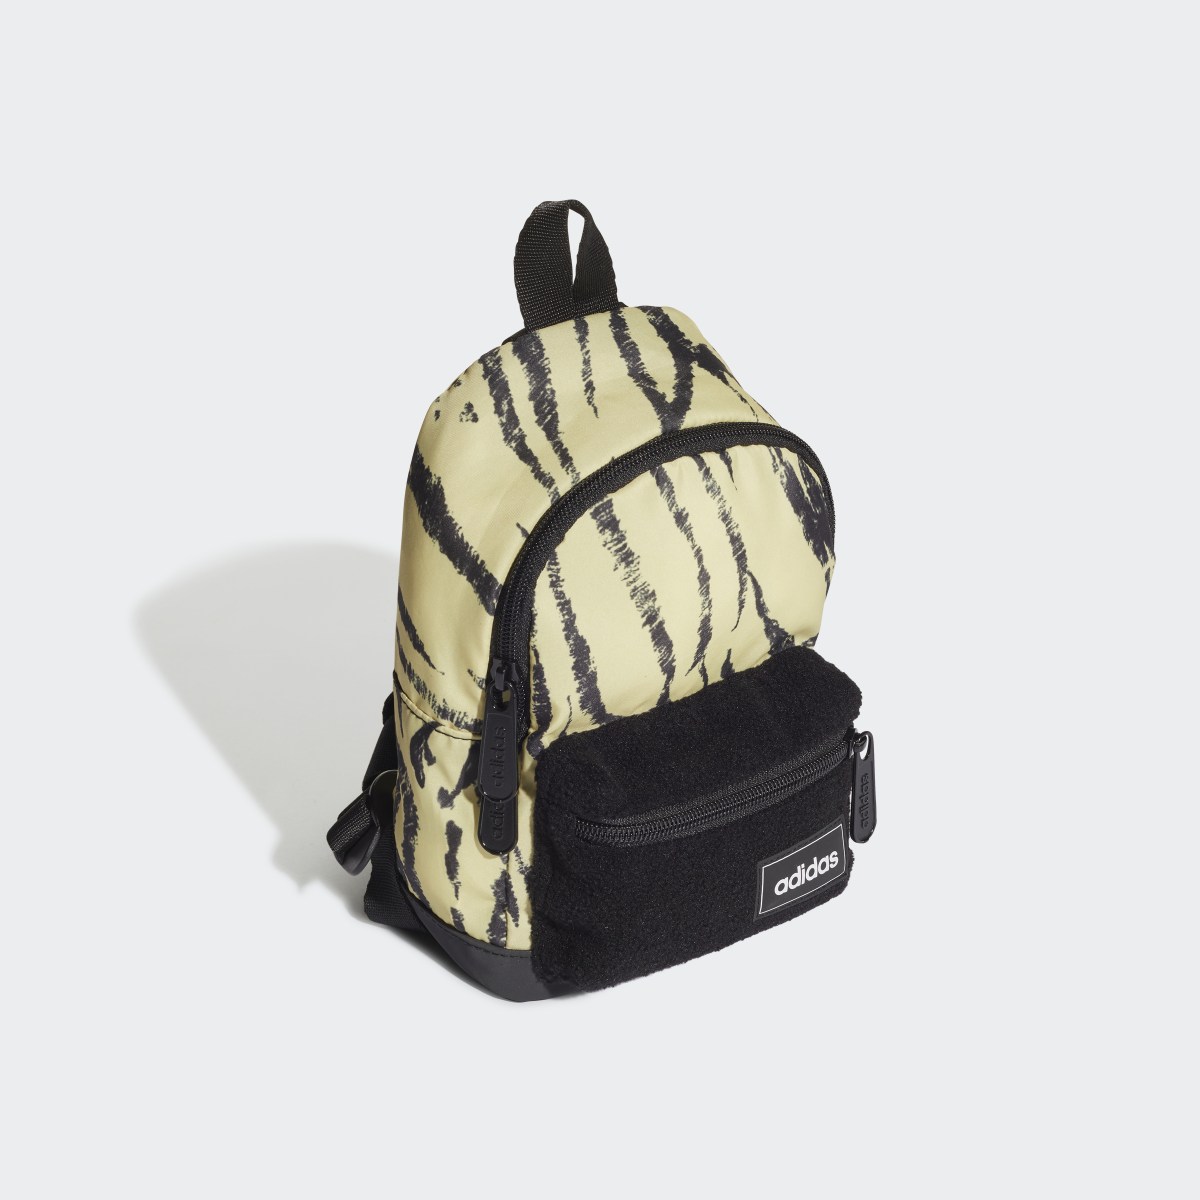 Adidas Tailored for Her Sport to Street Training Mini Rucksack. 4